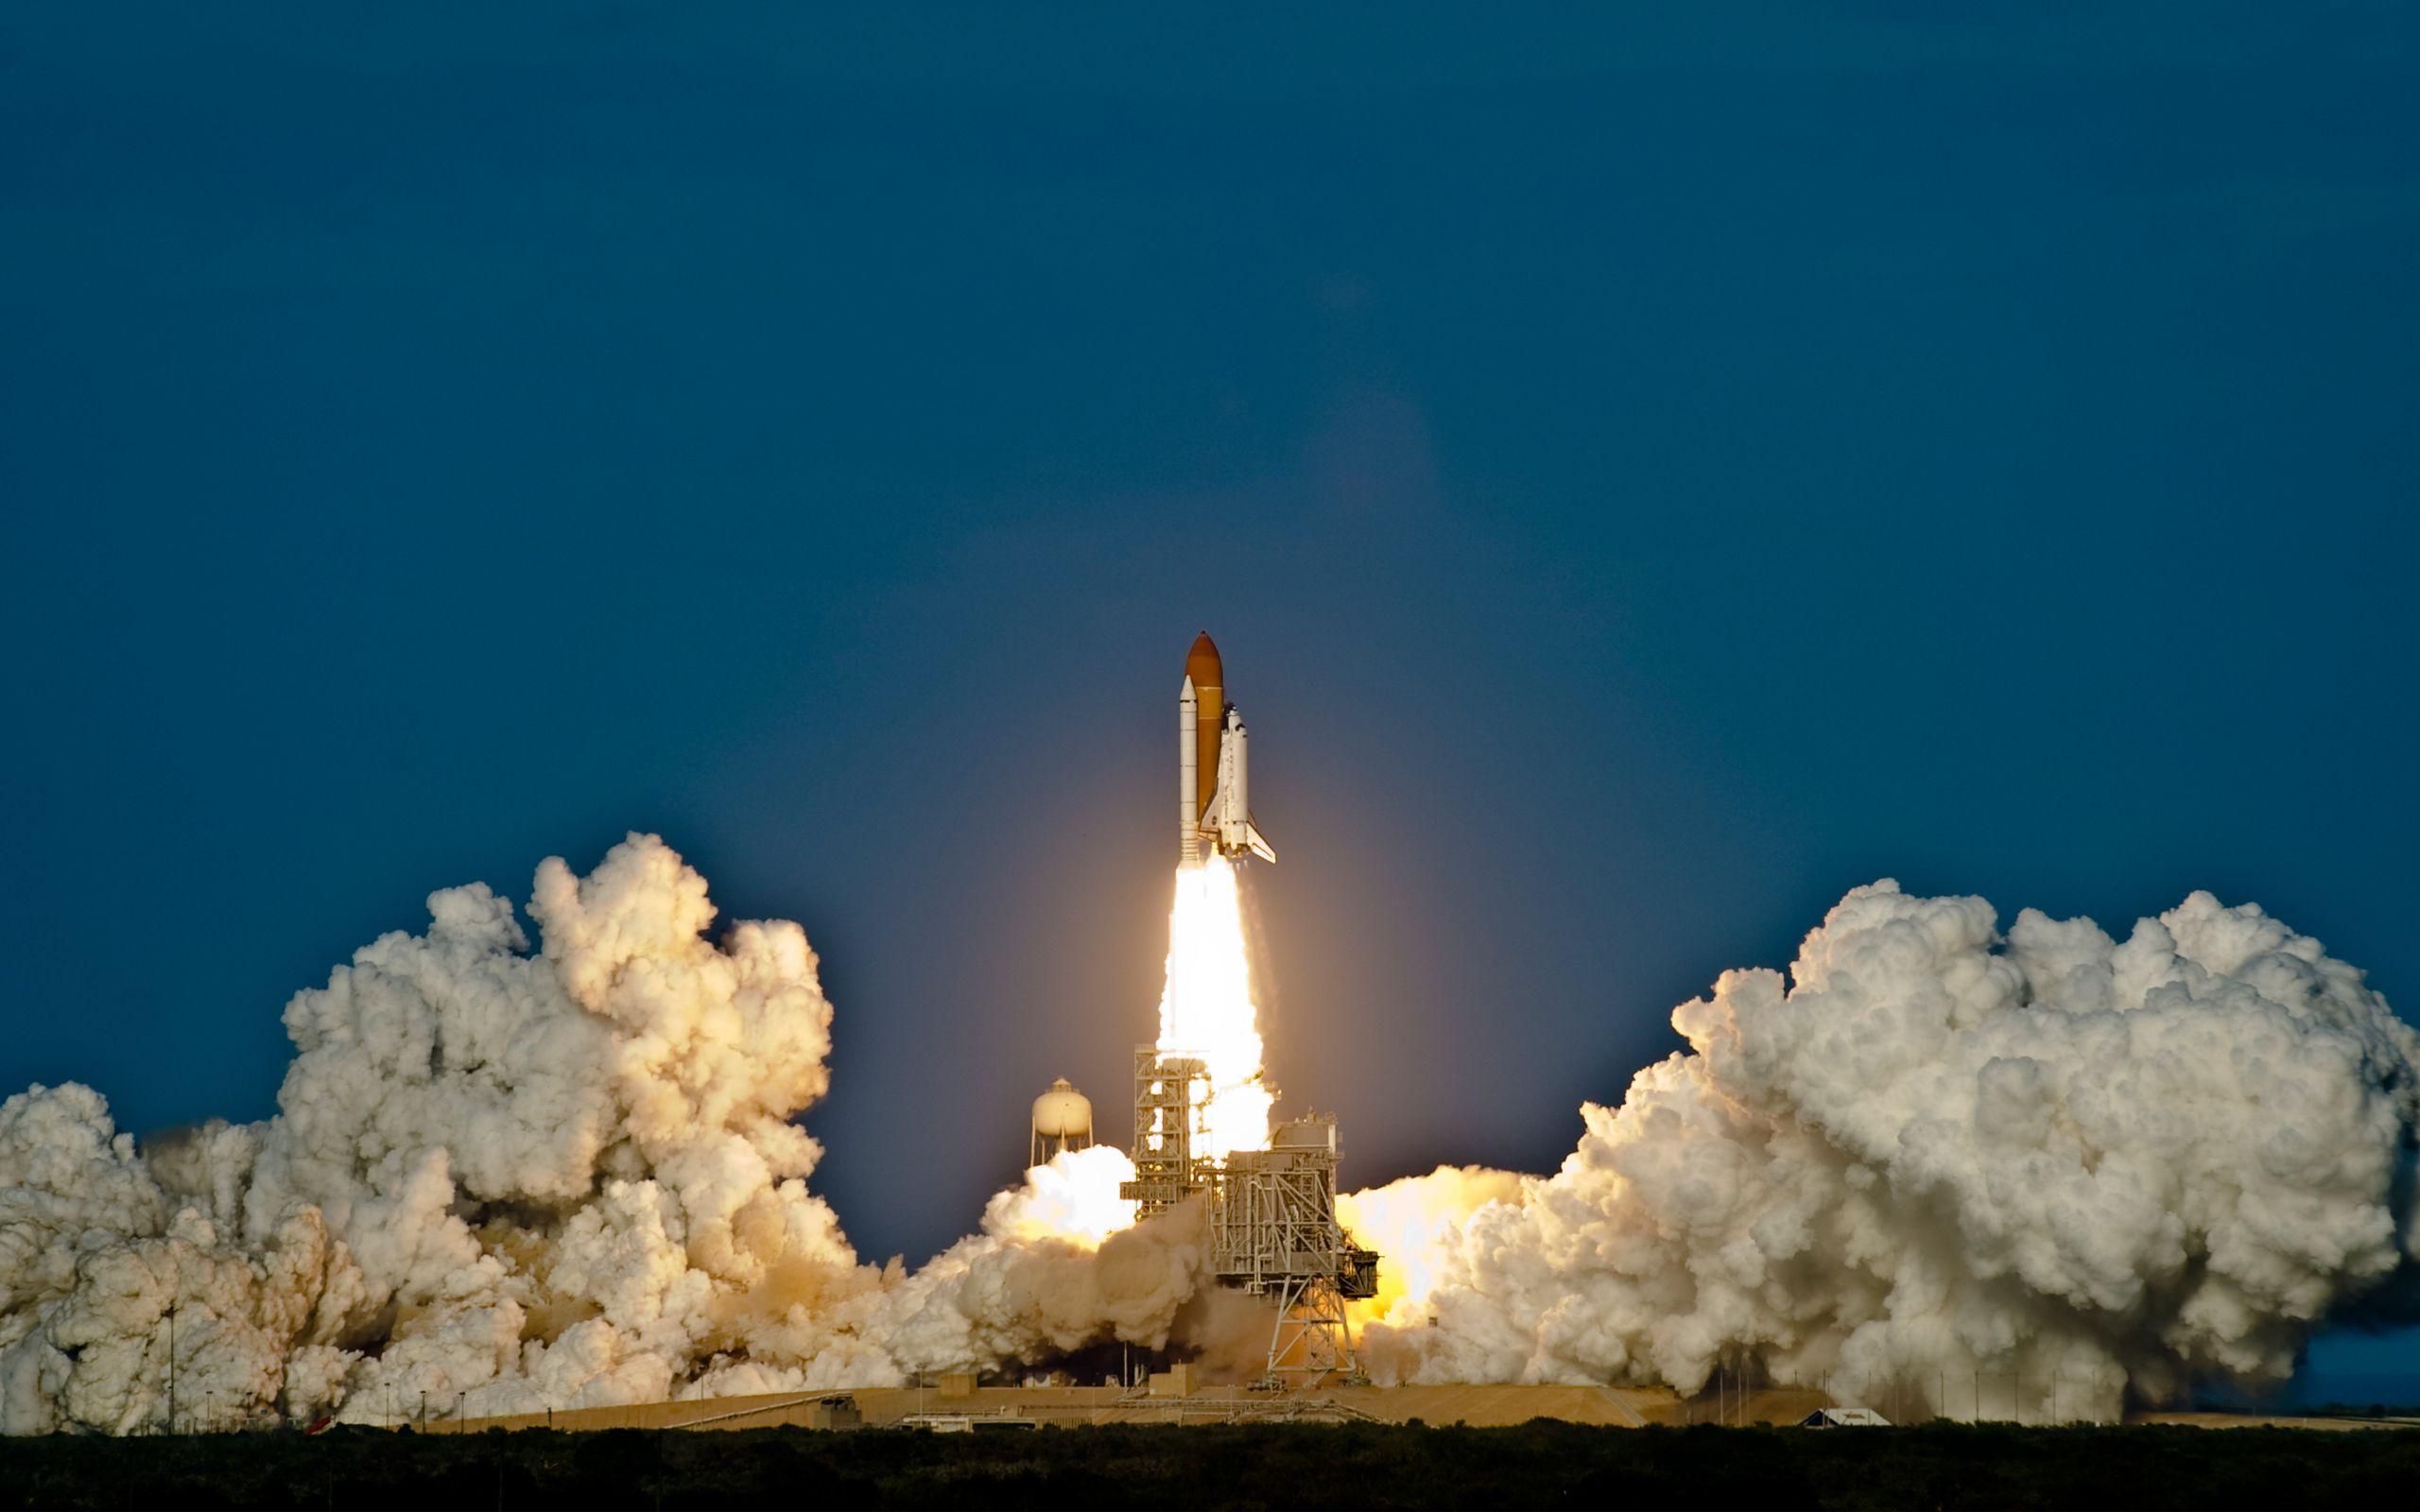 Vehicles For > Space Rocket Wallpaper. ROCKET LAUNCHES